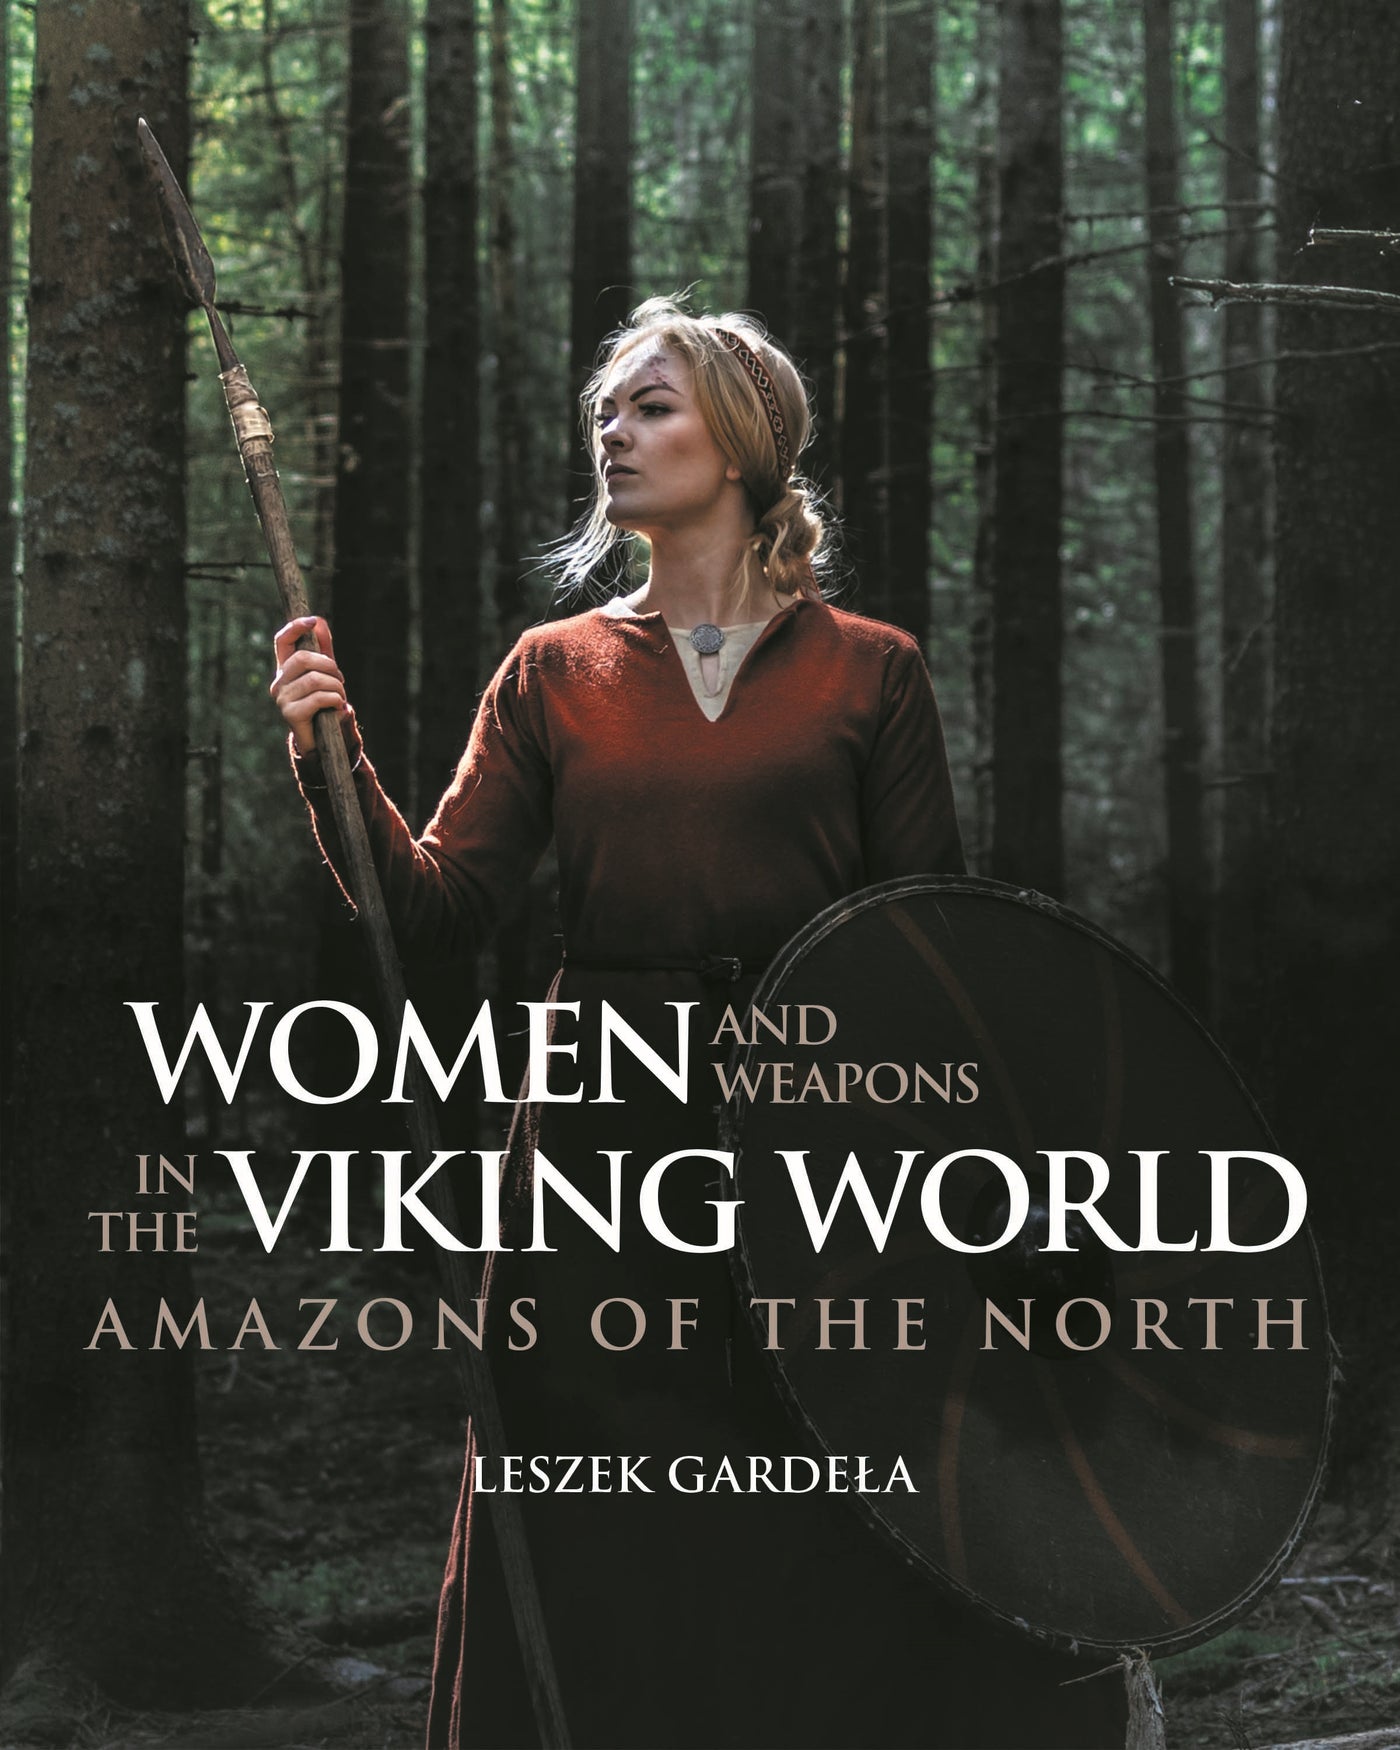 Women and Weapons in the Viking World